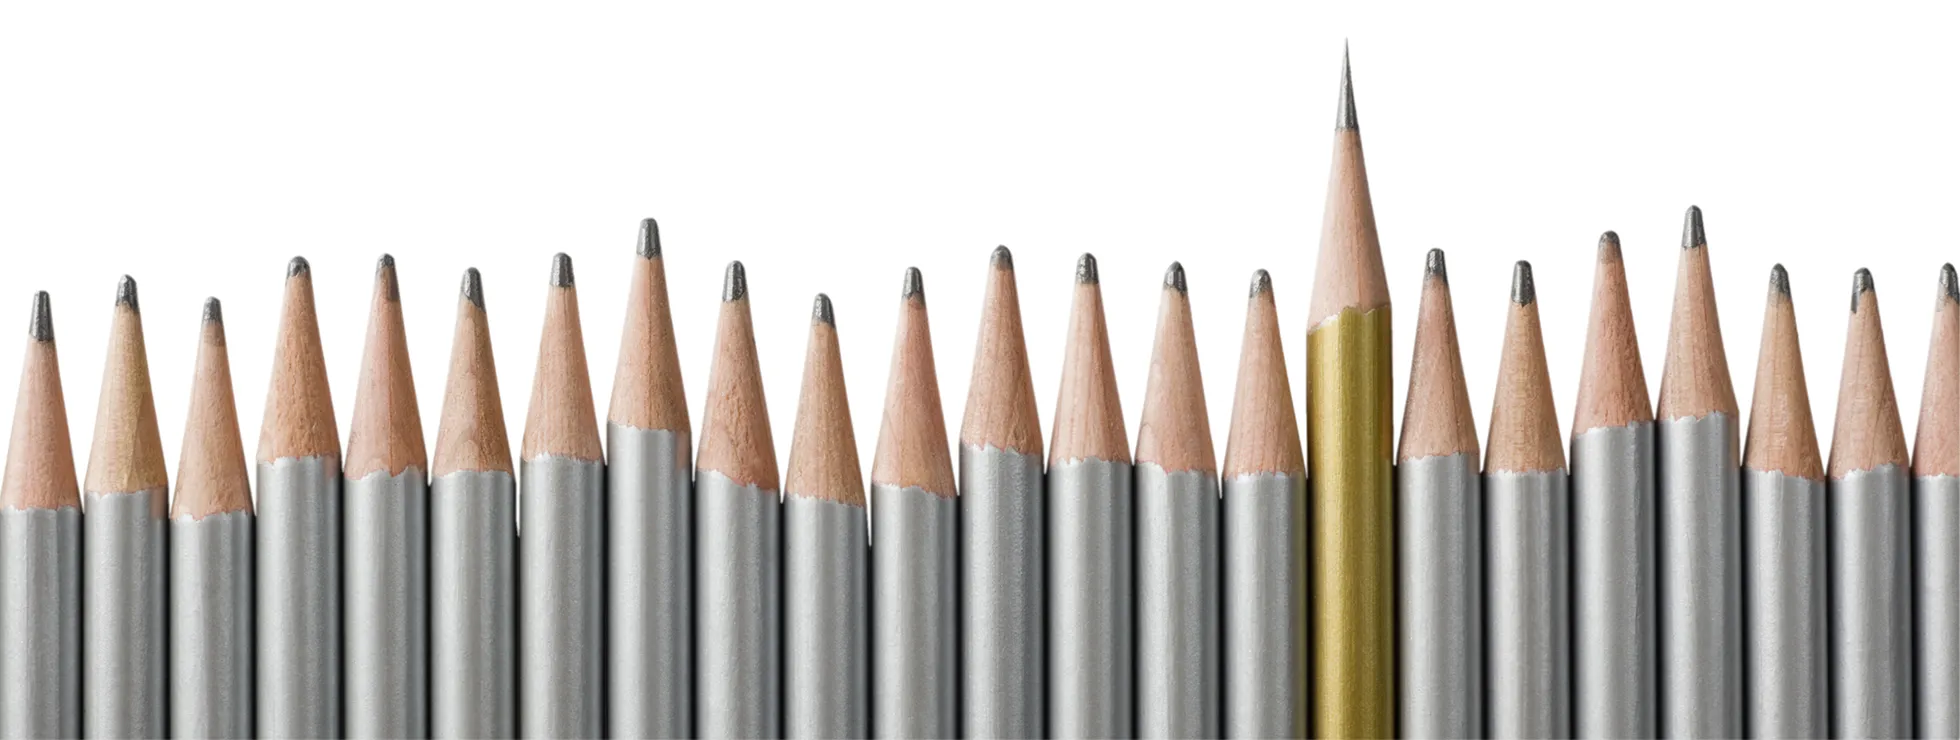 A row of identical blunt silver pencils, with one sharp gold coloured pencil standing tall in the row - distinctive, standing out from the crowd